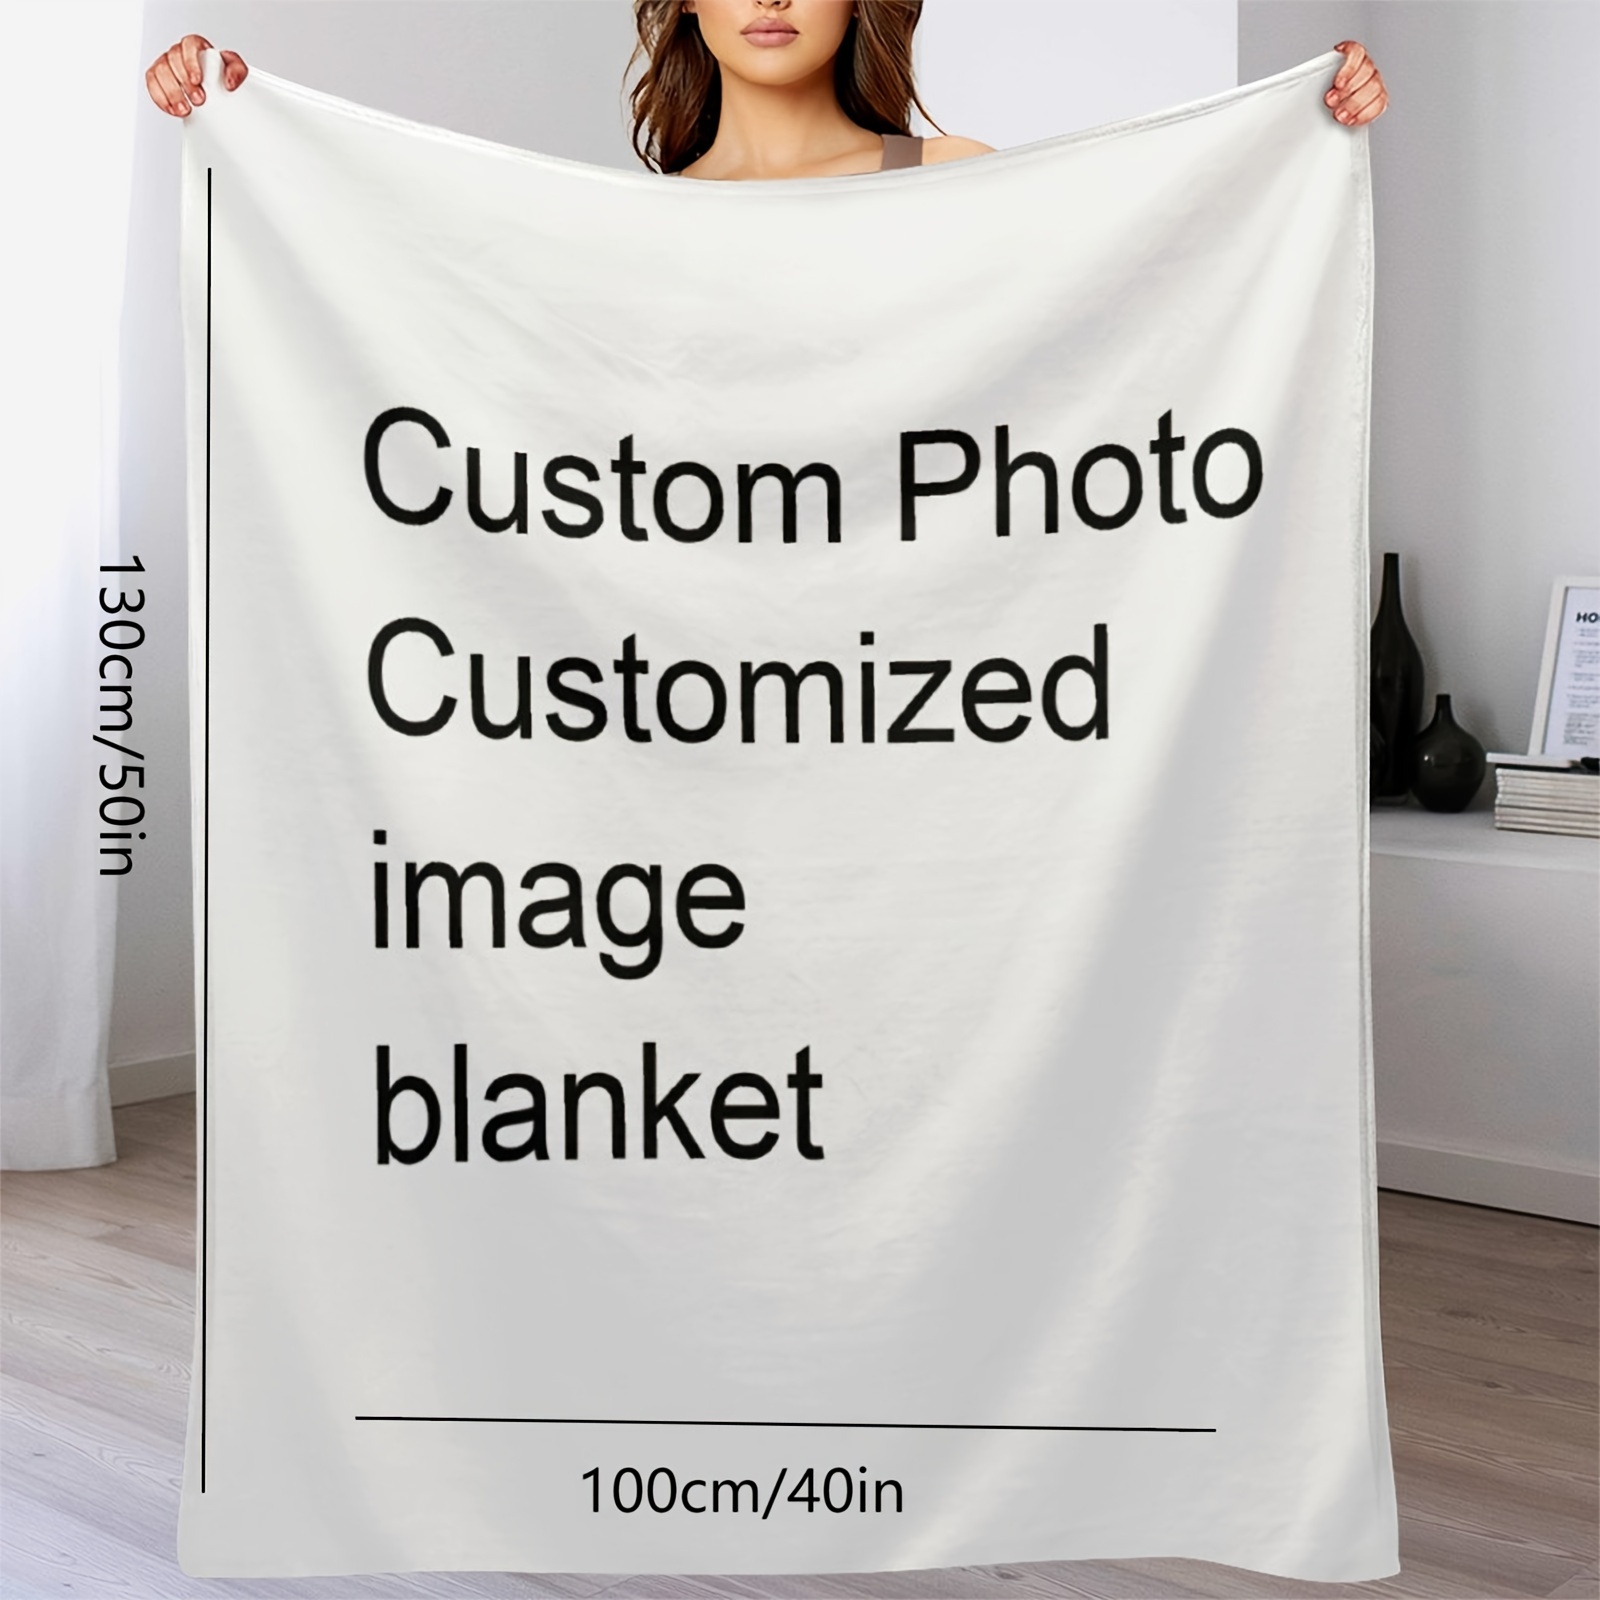 

Custom Photo Throw Blanket Customized Pictures Blanket Personalized Blanket For Family Wedding Birthday Christmas Valentine's Day Gifts For Women Him Her 100x130cm/40x50in